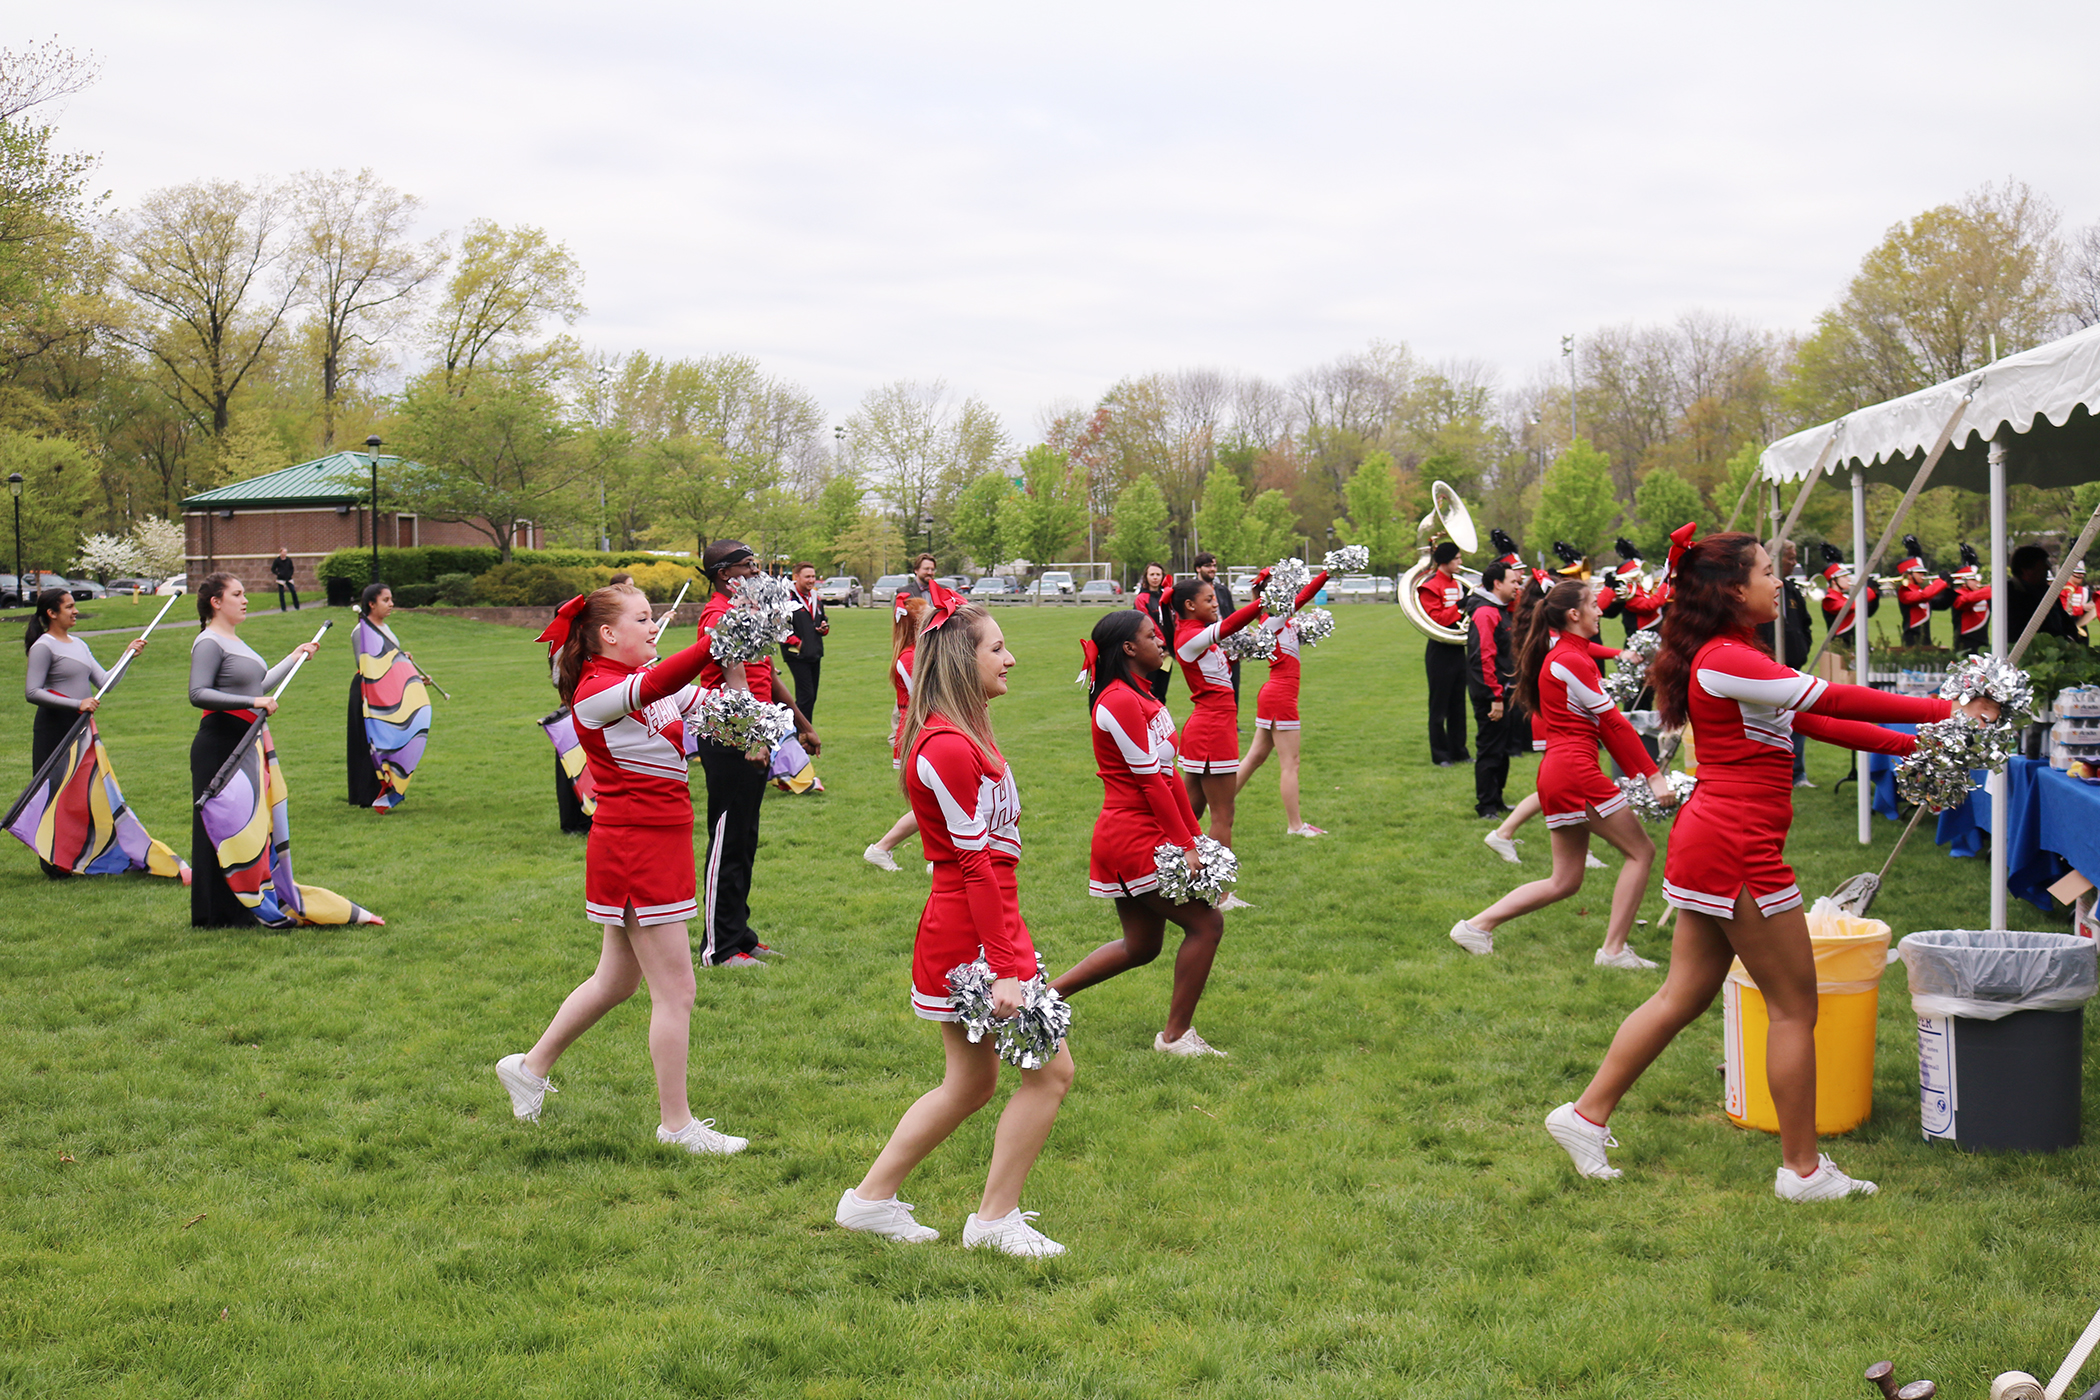 Parsippany, New Jersey. Parsippany may be only 35 miles from the Big Apple, but it feels like small-town America and is proud of its connection to the outdoors. (For instance, these cheerleaders are celebrating Arbor Day.)